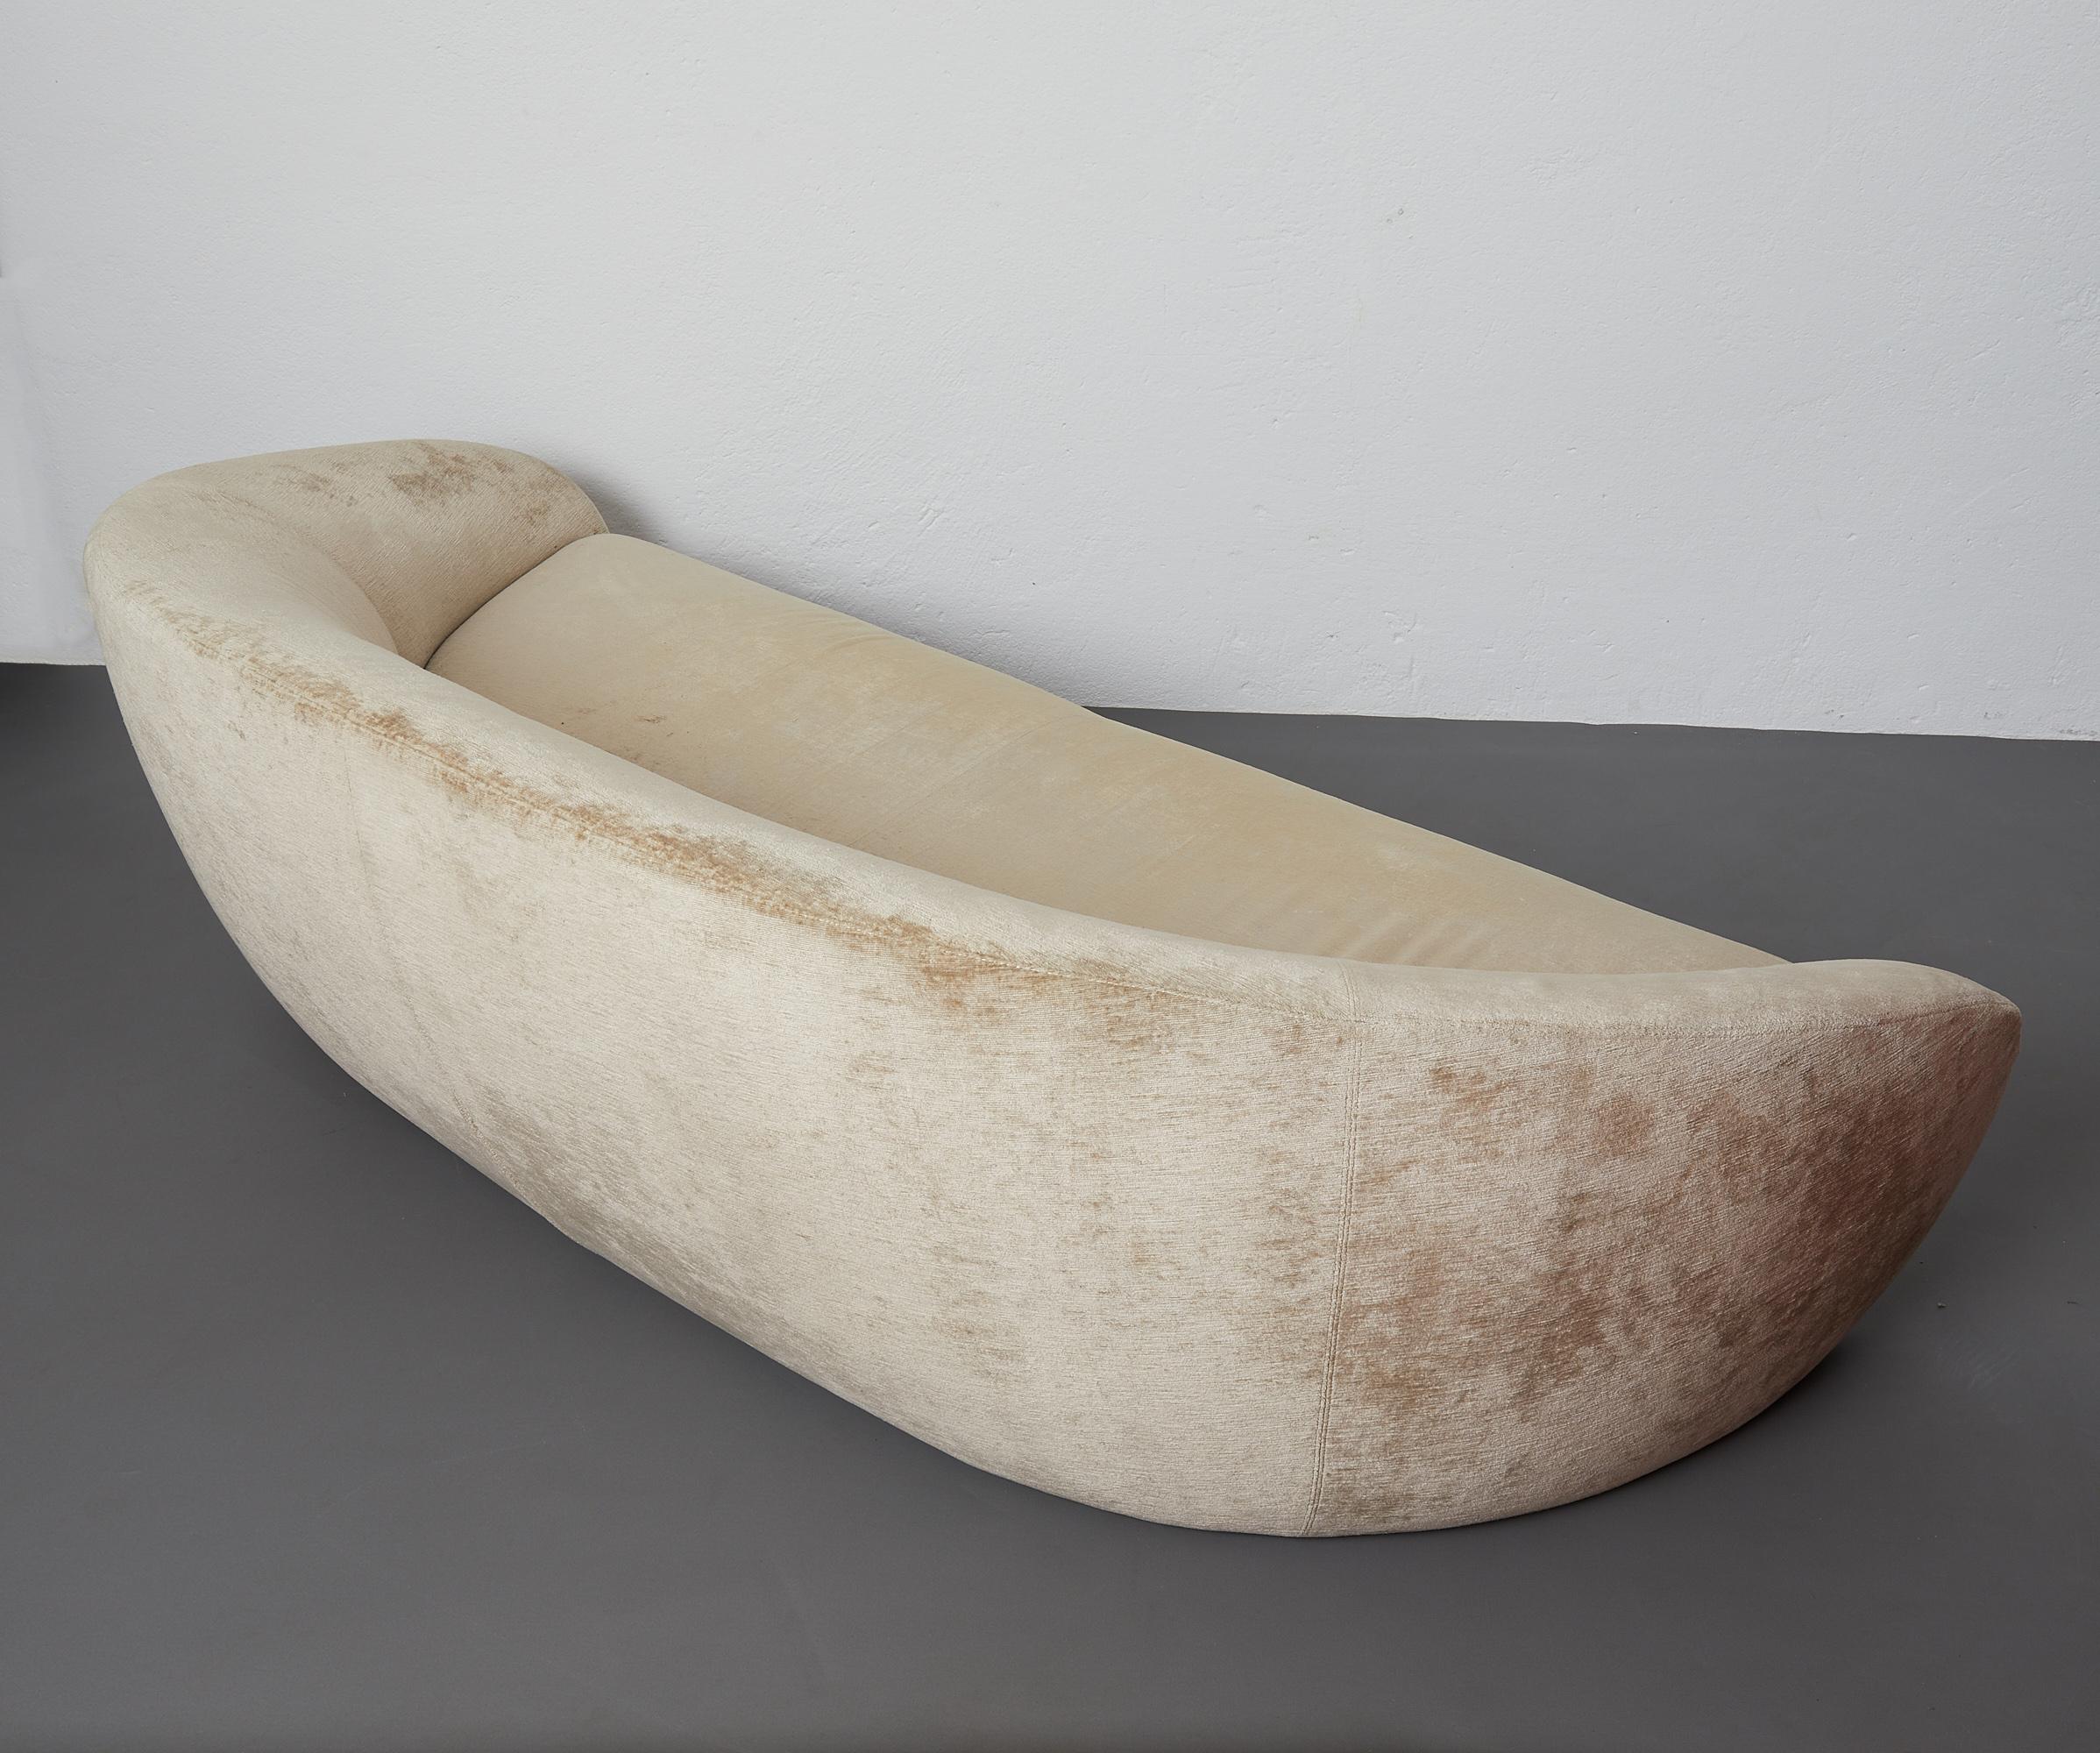 Italian beige velvet curved sofa by Roberto Lazzeroni for Ipe Cavalli, Italy.

This sofa is exceptionally comfortable. With its nicely curved shape and large and deep seating surface this sofa just invites to take a seat.

Currently upholstered